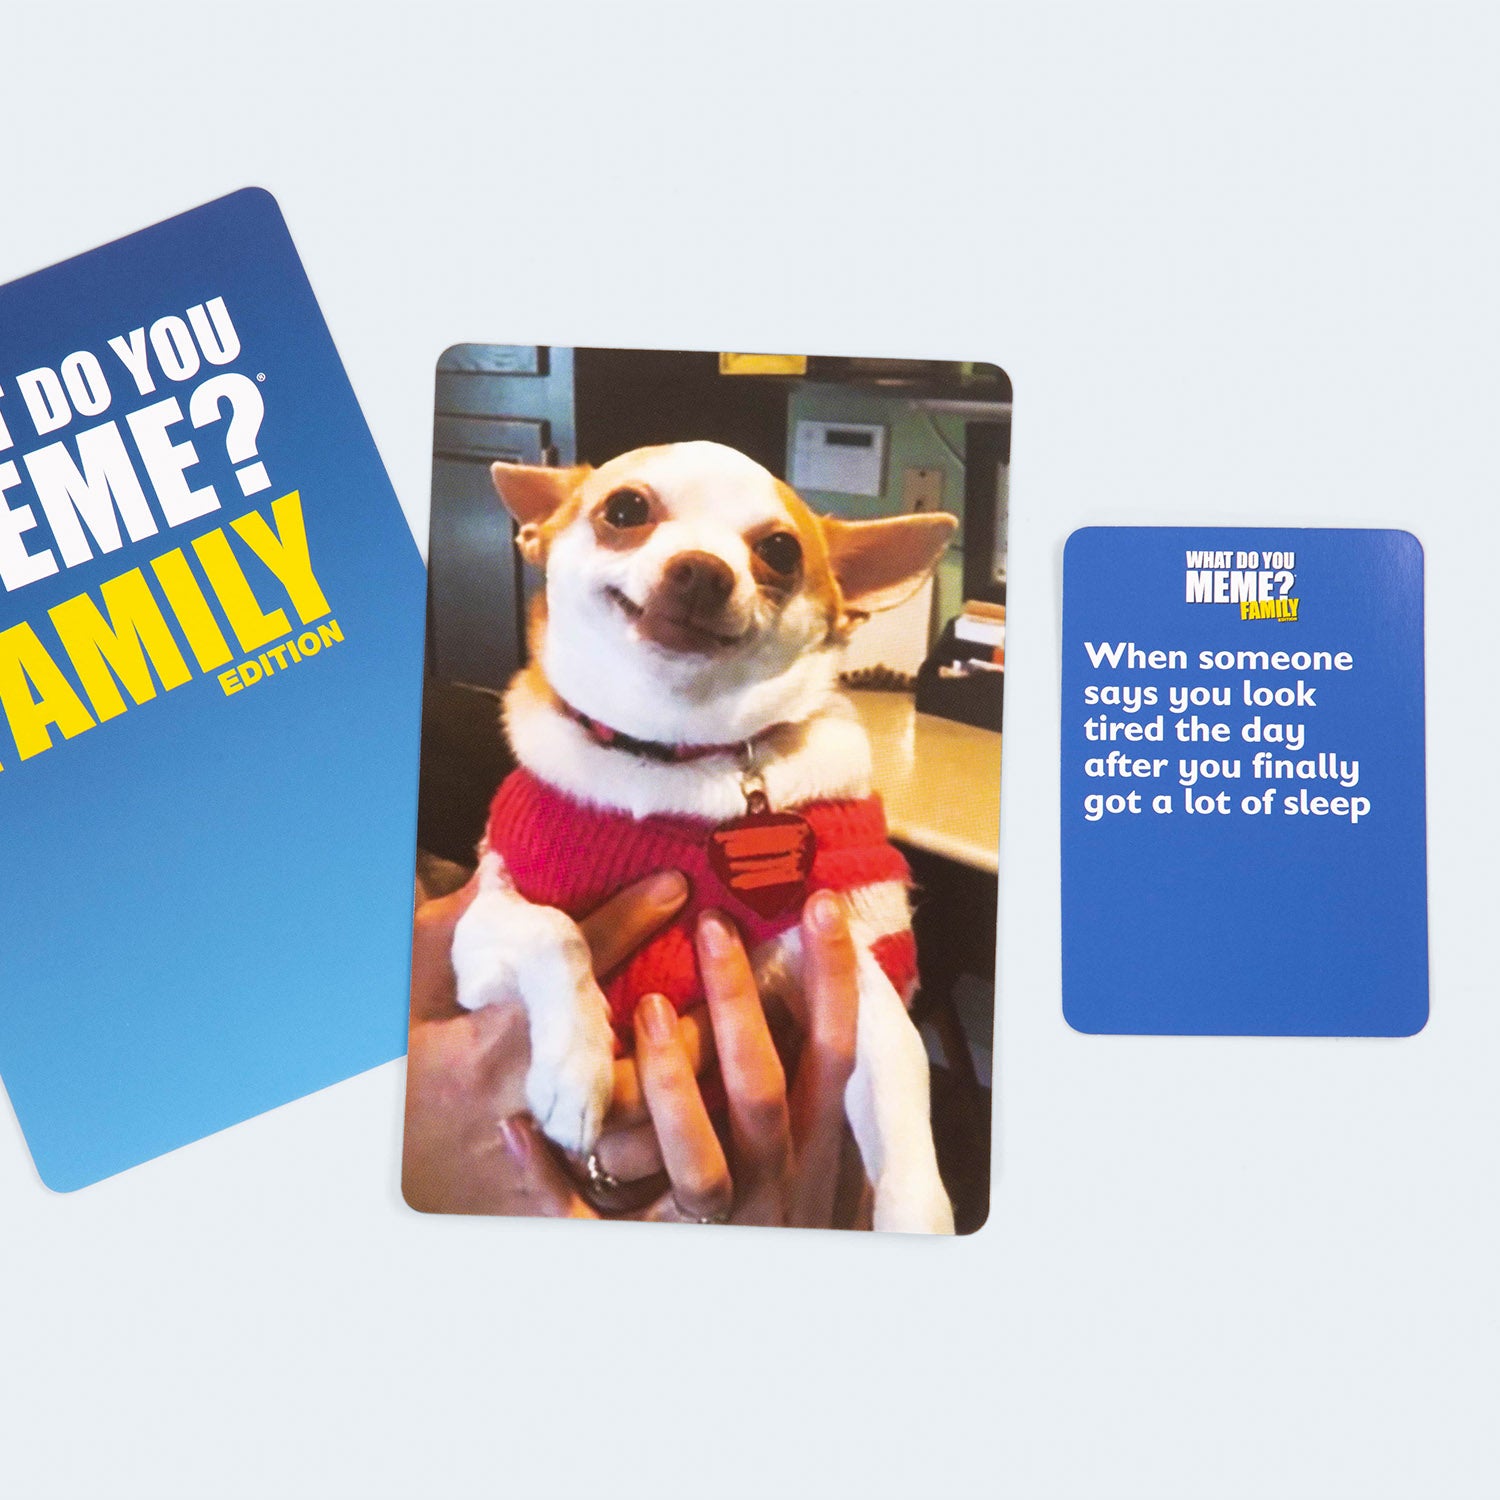 what-do-you-meme-family-edition-expansion-pack-game-box-and-game-play-09-what-do-you-meme-by-relatable